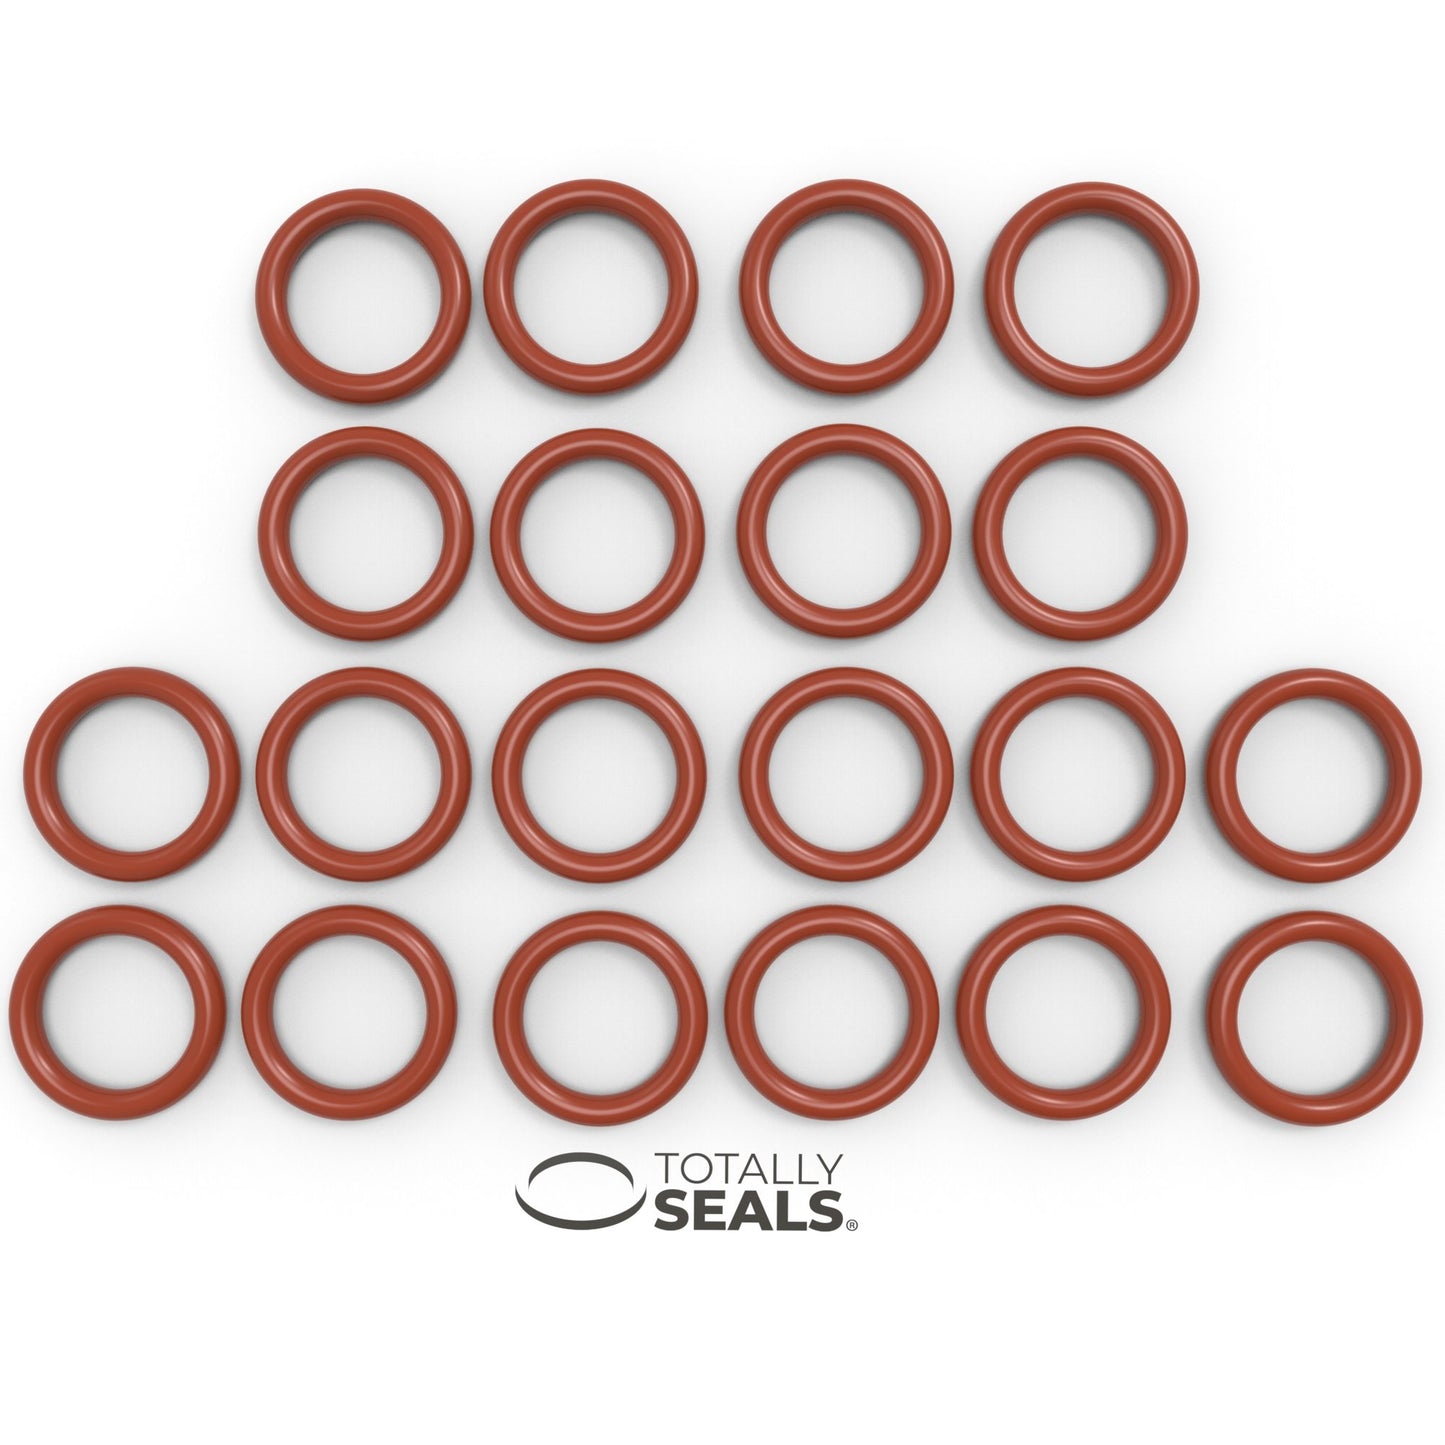 7mm x 2mm (11mm OD) Silicone O-Rings - Totally Seals®